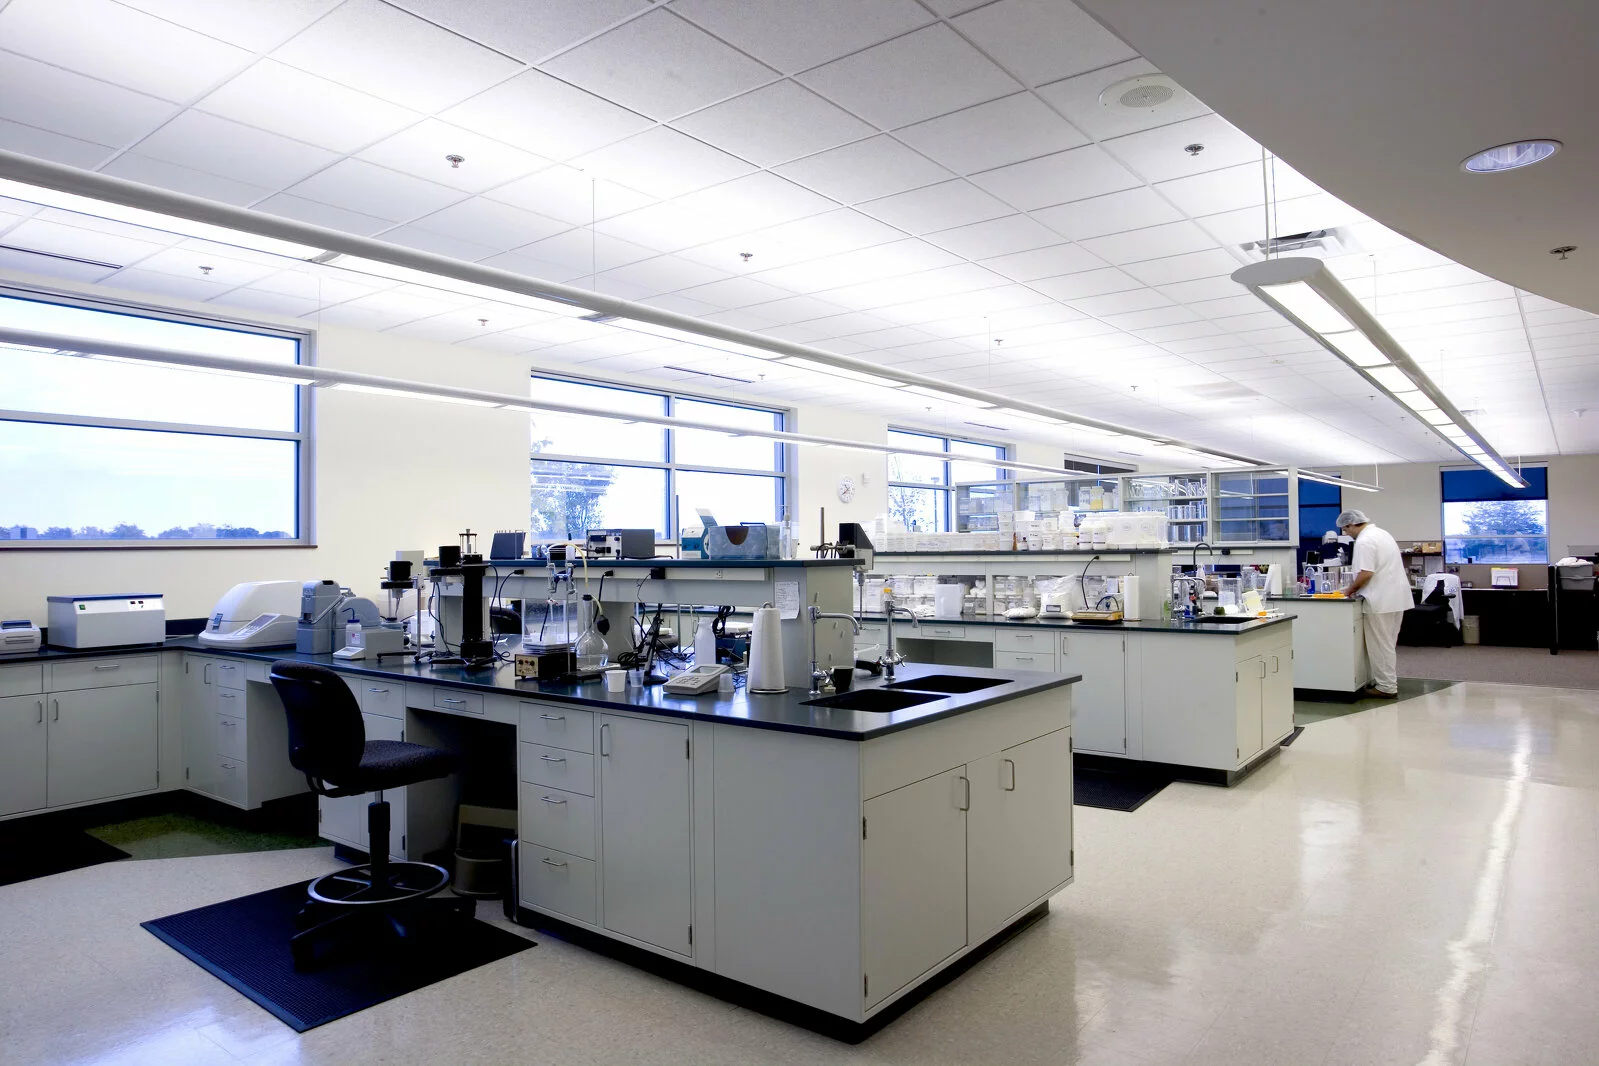 Interior Tate & Lyle Science lab, workstations, double sinks at each workstation, beakers, employee performing a task in background, white room with tile floor.